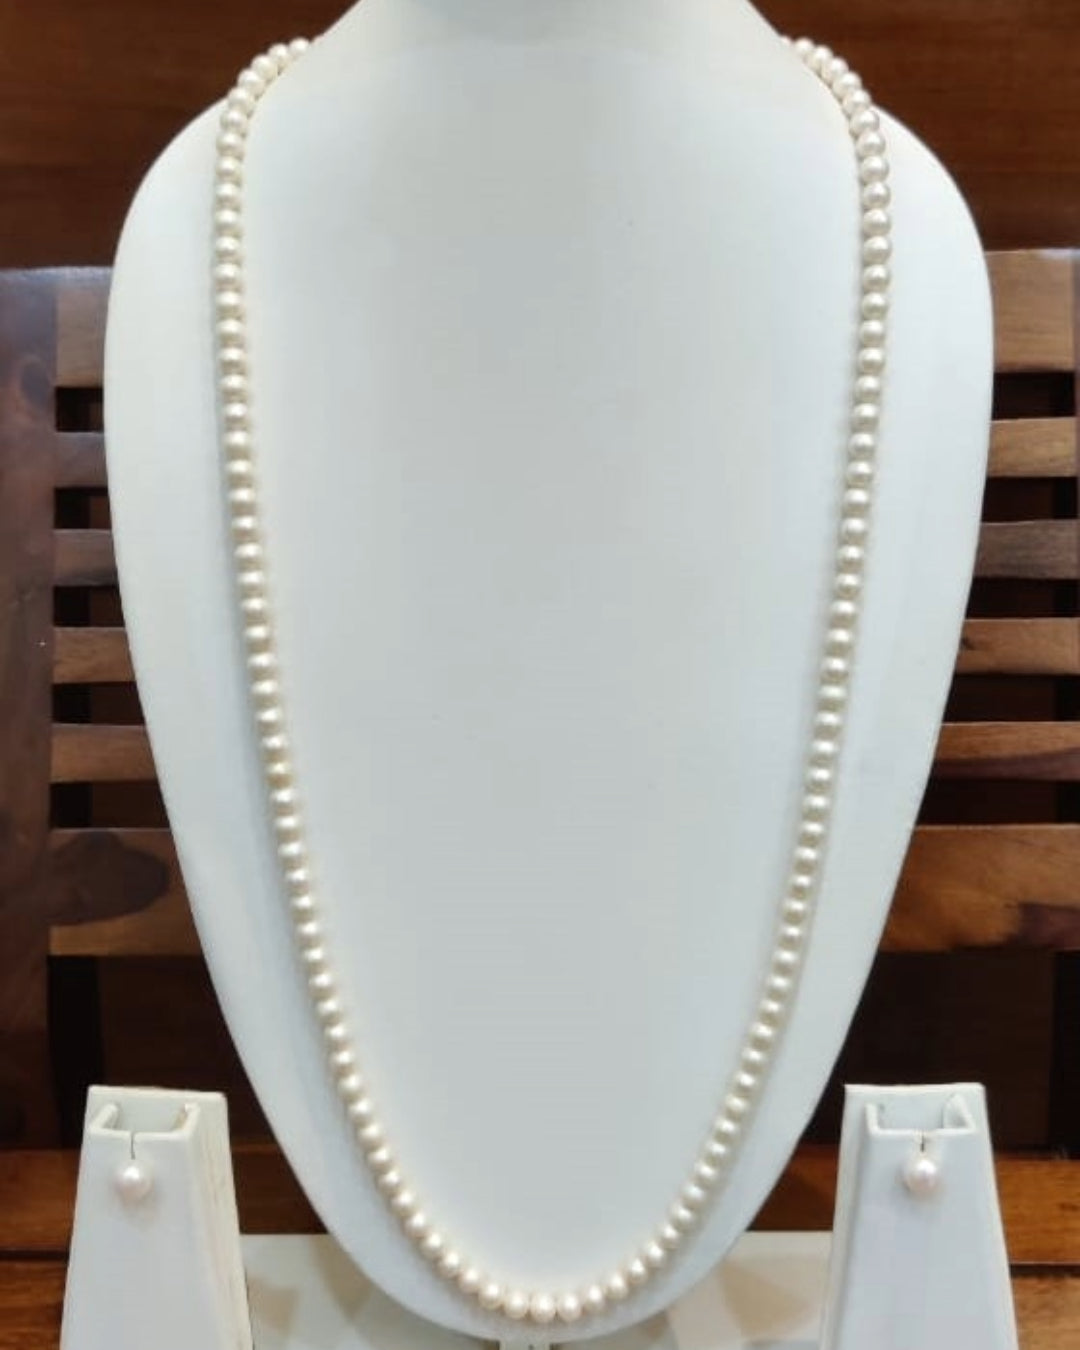 My Pearls 6 mm white Round Pearls Long Necklace Set